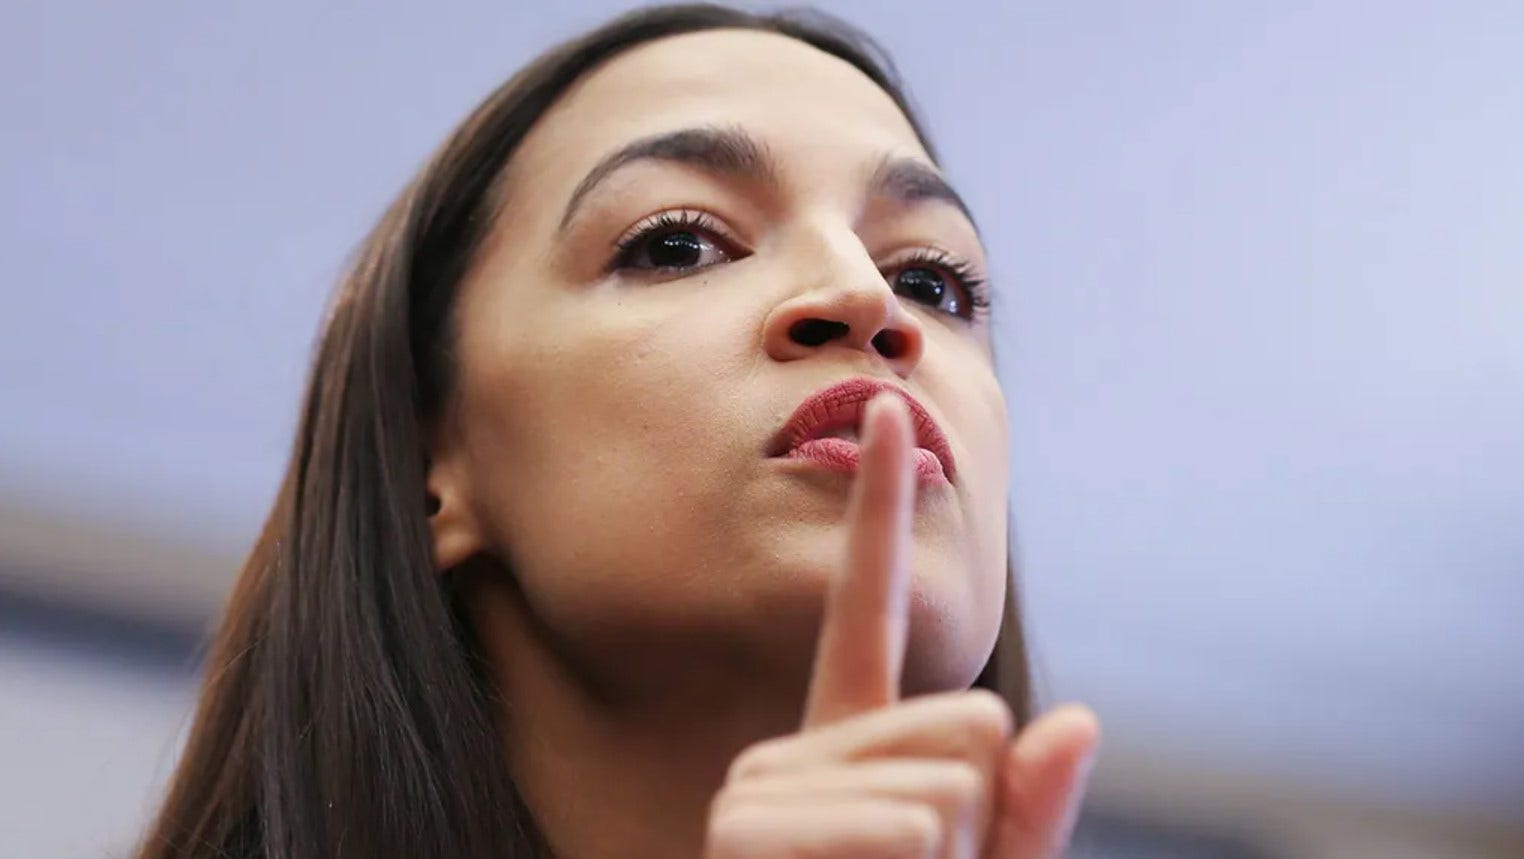 ‘Not just a right wing thing’: AOC snaps at left-wing ‘rumors’ she hosted a military recruitment event